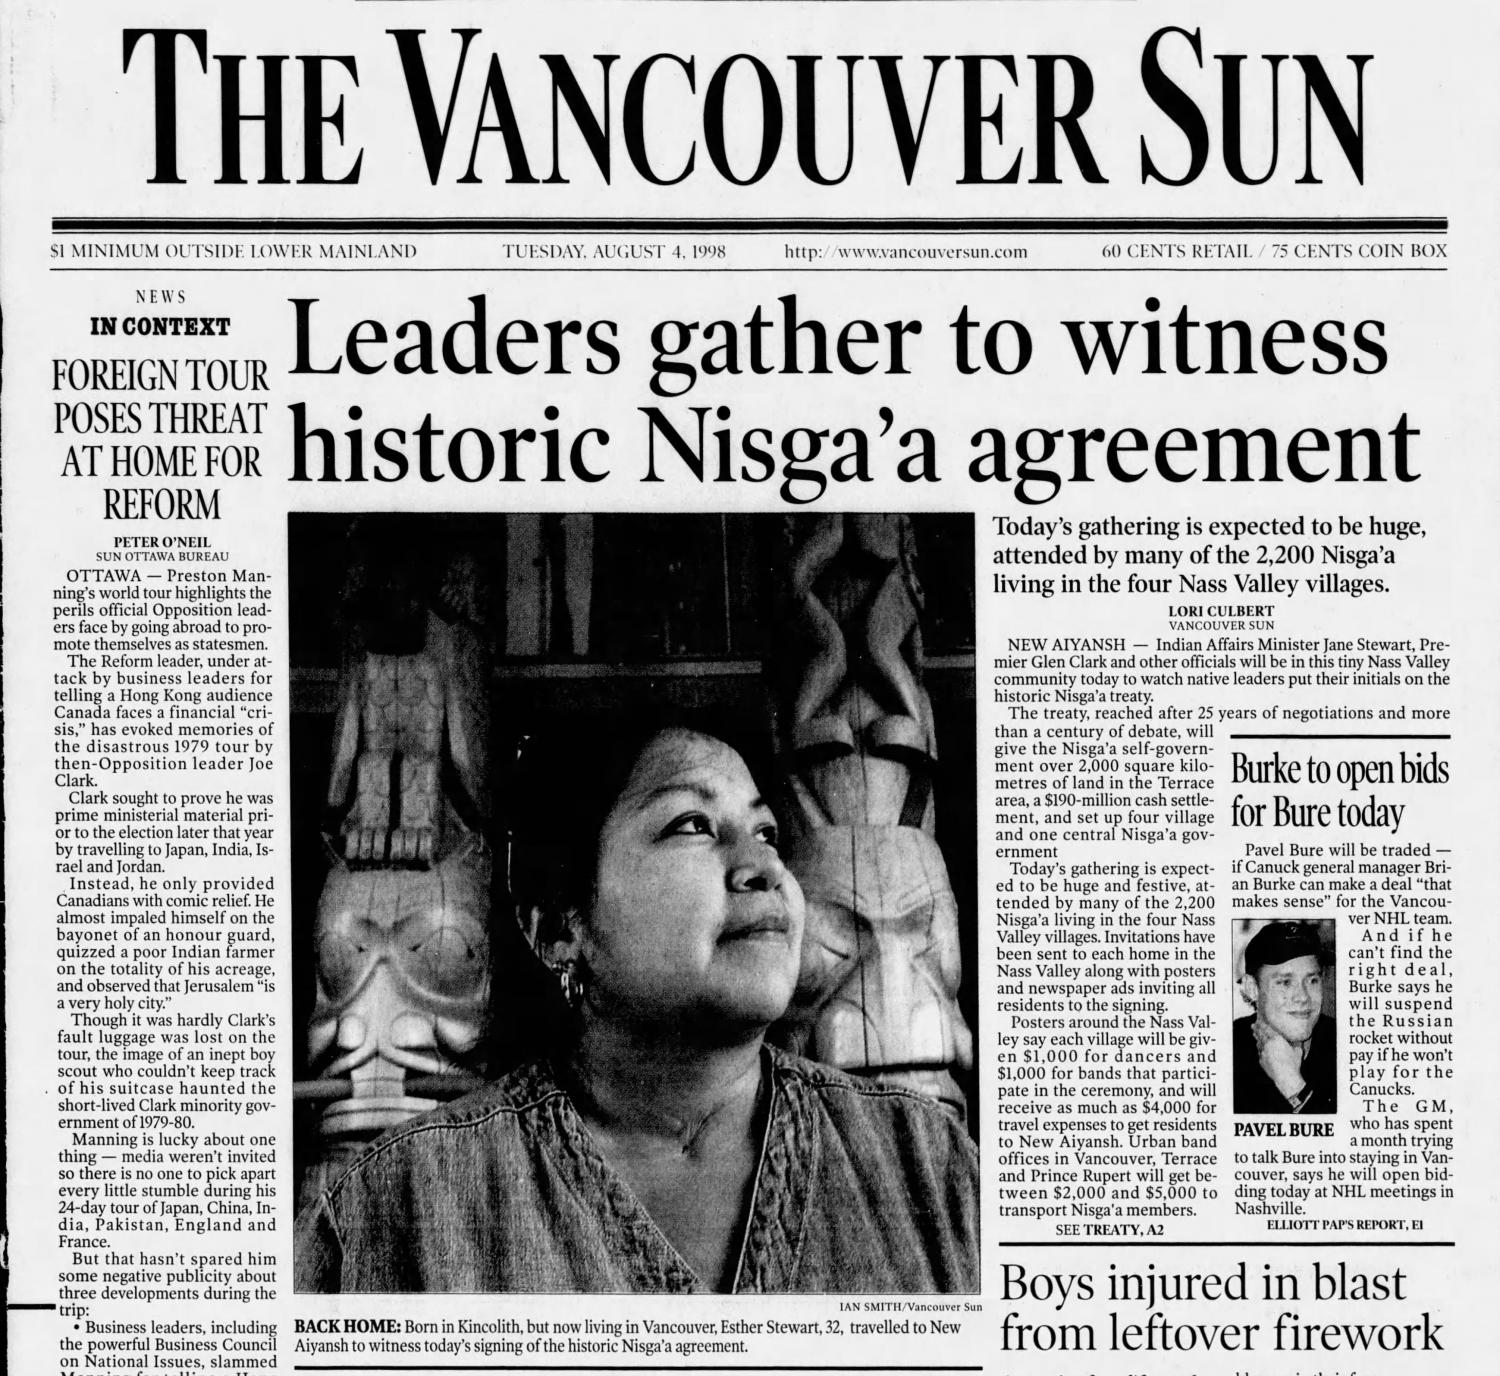 Vancouver Sun front page about Nisga'a treaty.